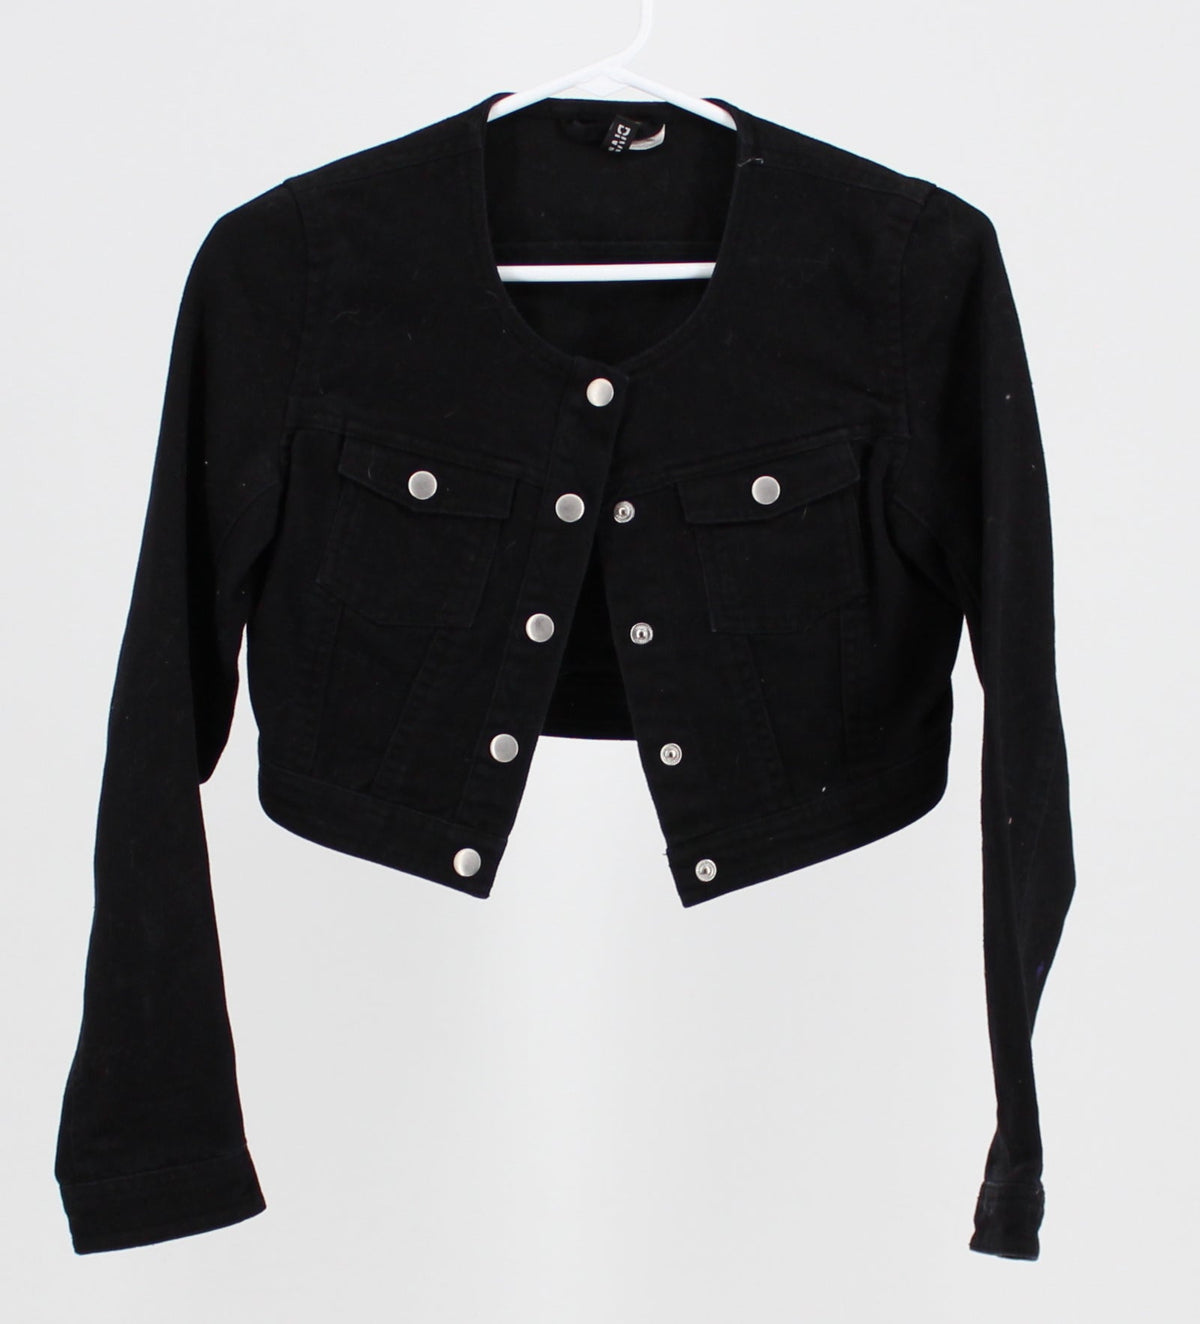 H&M Black Cropped Denim Jacket with Silver buttons